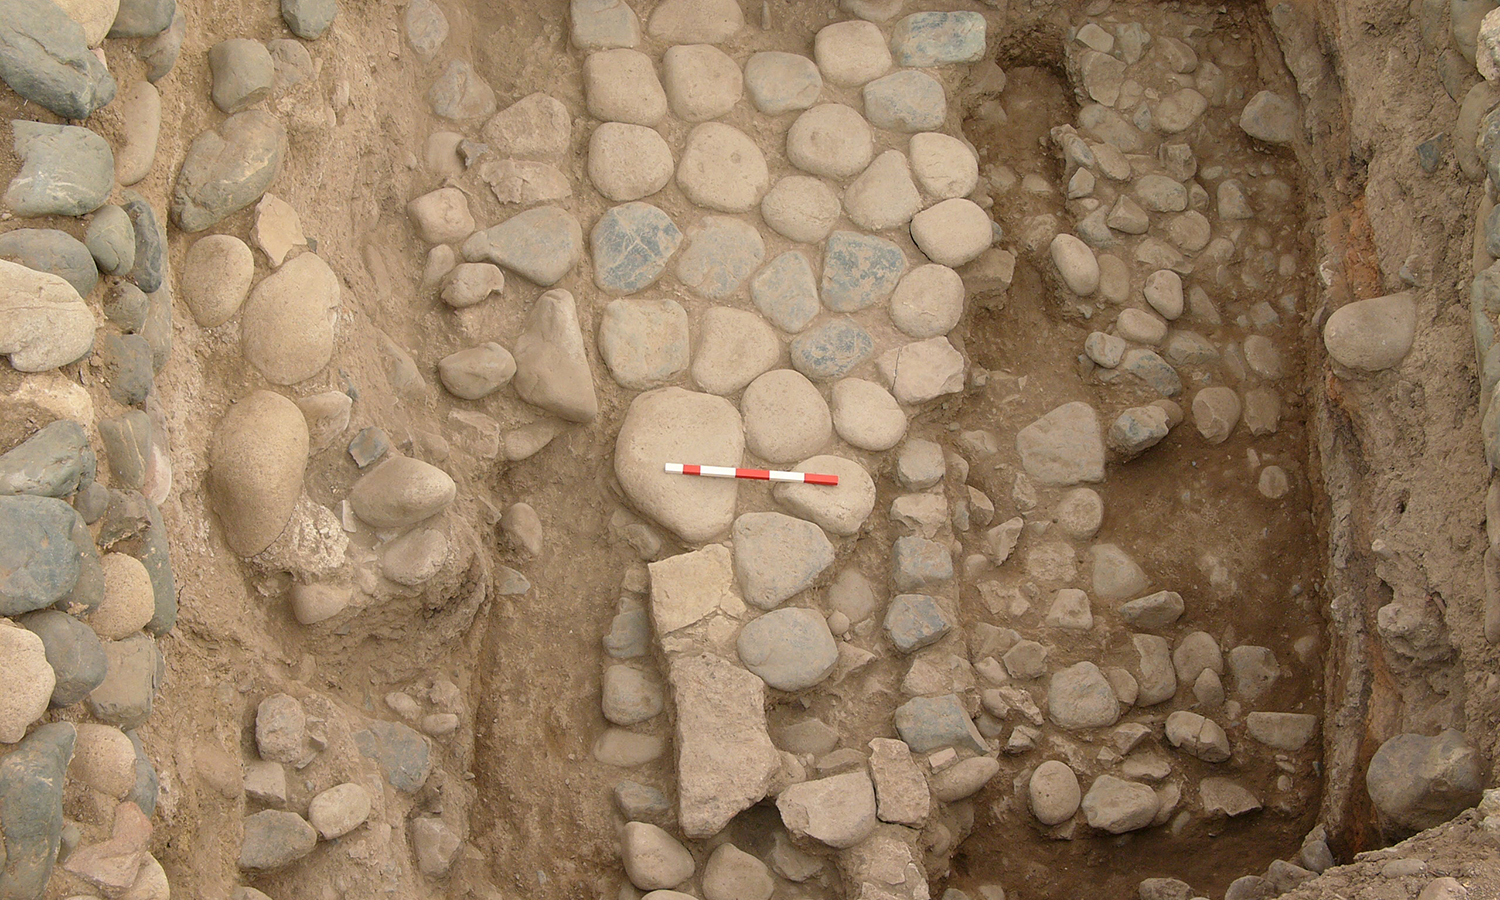 Architectural remains of the Middle Bronze Age (circa 1.600 BC).